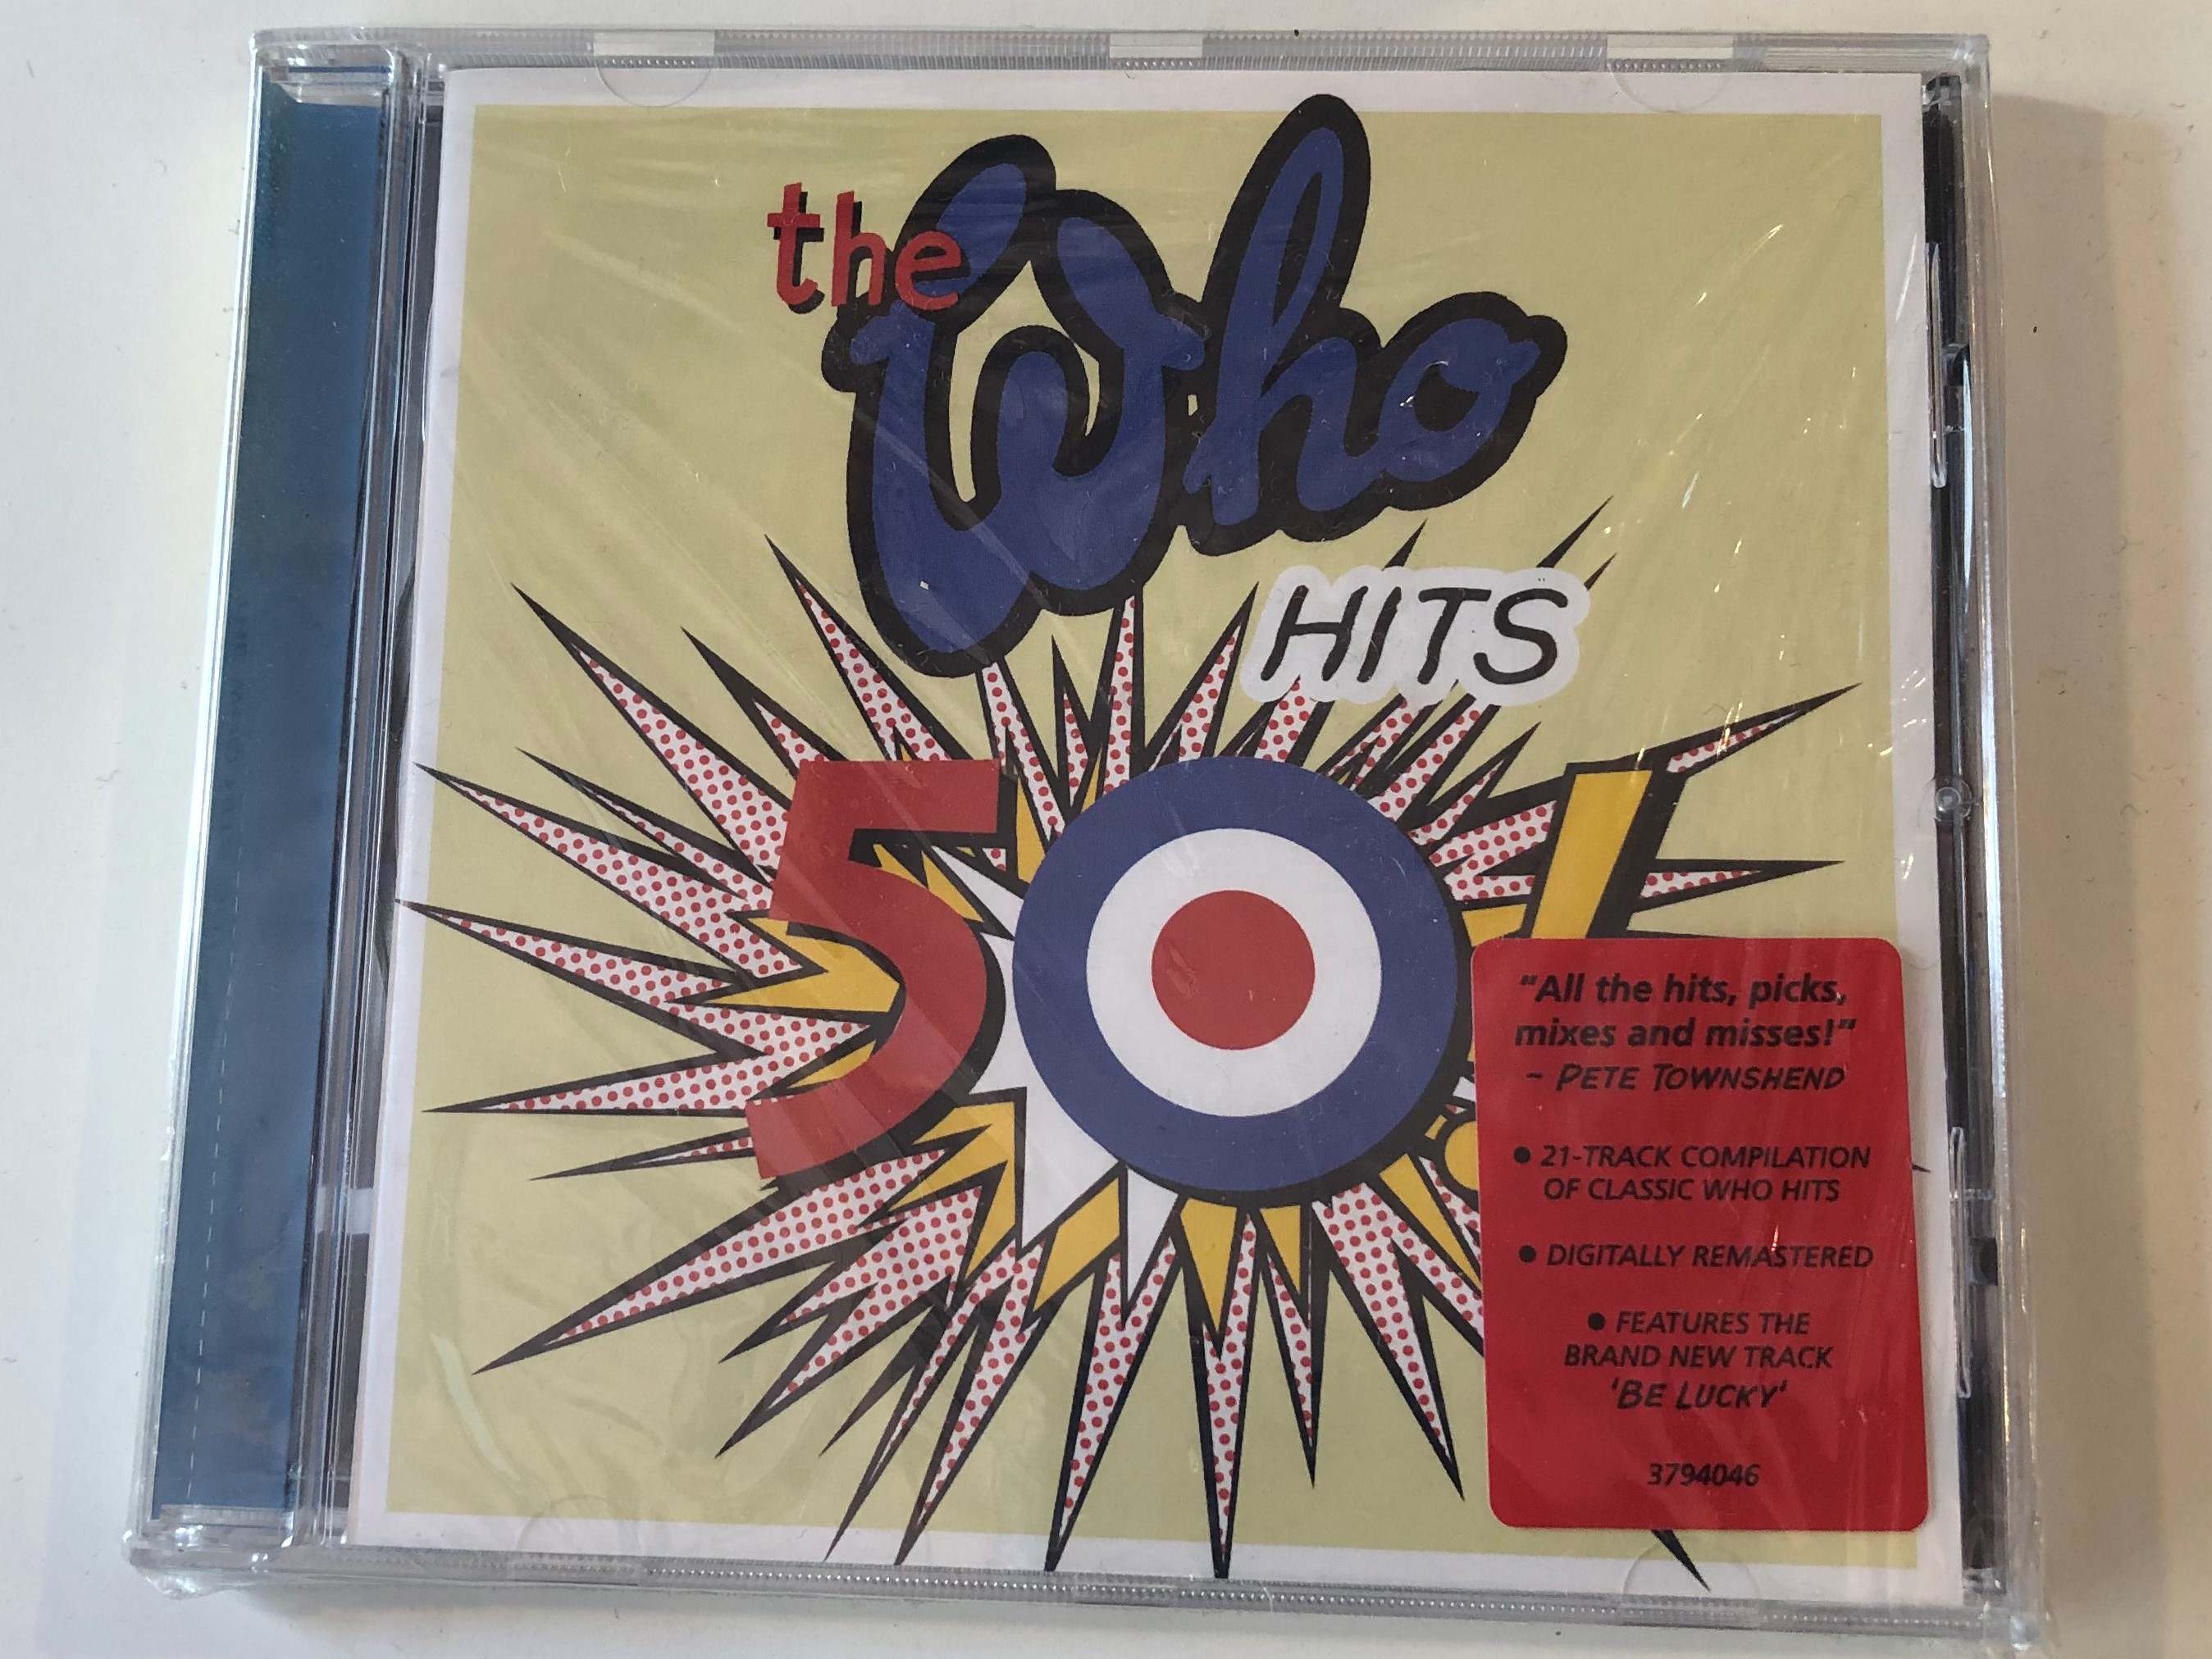 the-who-hits-50-21-track-compilation-of-classic-who-hits-digitally-remastered-features-the-brand-new-track-be-lucky-polydor-audio-cd-2014-3794046-1-.jpg